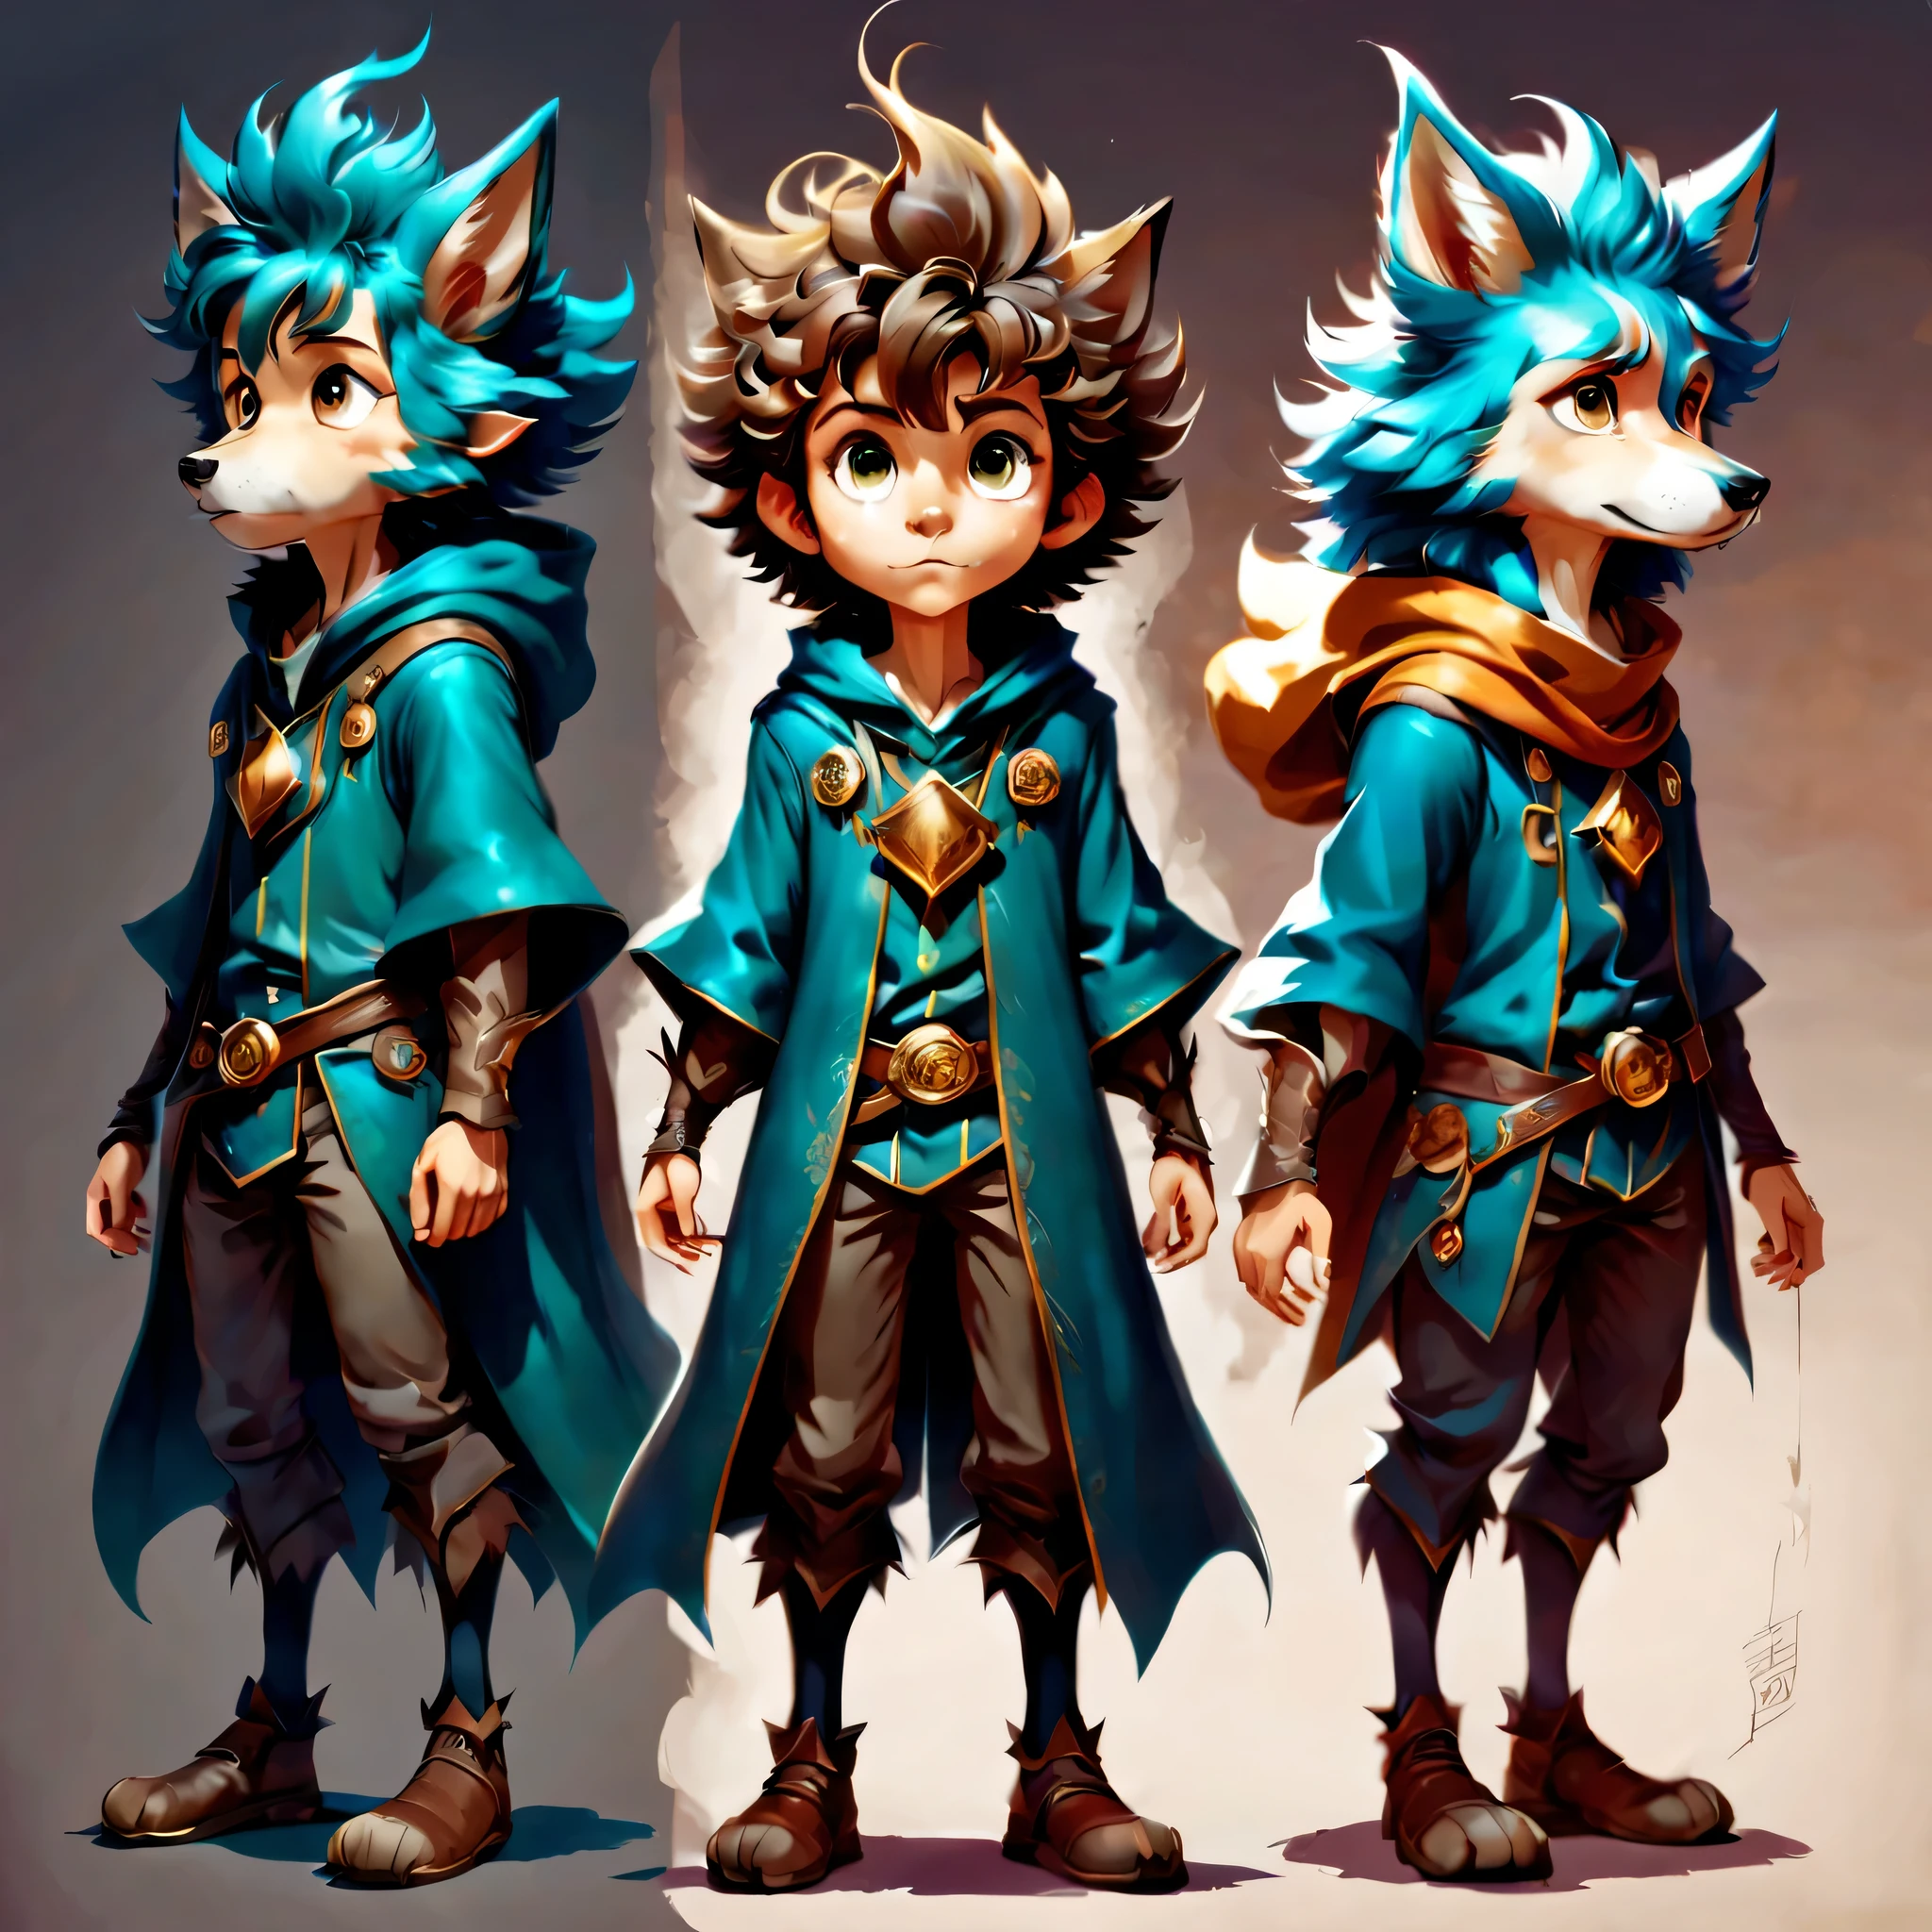 Create an original character design sheet,anime main character,boy,wizard,natural perm,my partner is a wolf,((3 views,whole body, background,multiple views,High resolution)),be familiar with,multiple views,Active,action pose,dynamic,nice,cute,masterpiece,highest quality,In detail,gracefully,sketch,sketch,ラフsketch,propose,In detail,8k,rendering,beautiful light and shadow